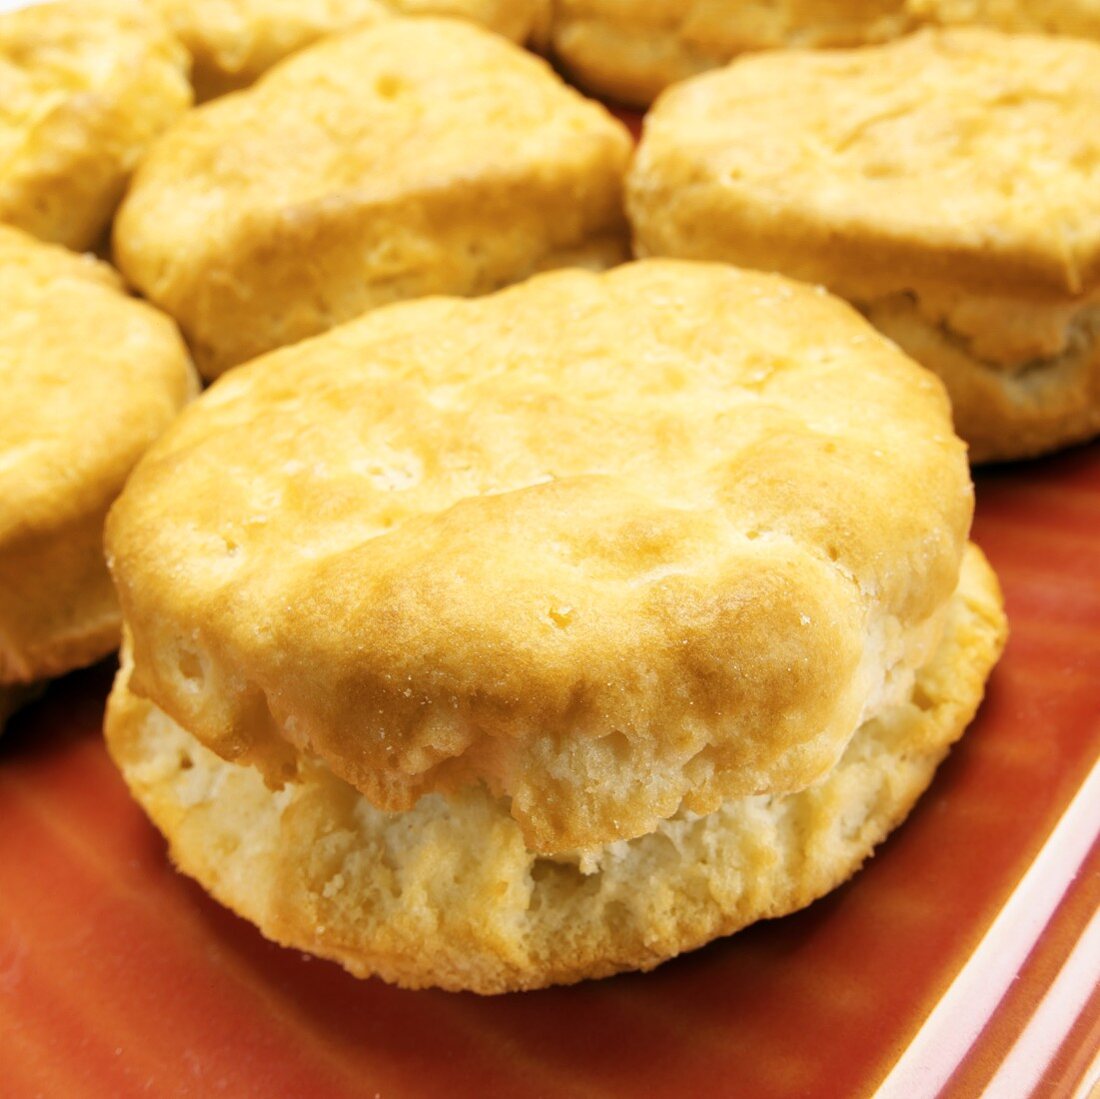 Buttermilk scones on red plate (close-up)